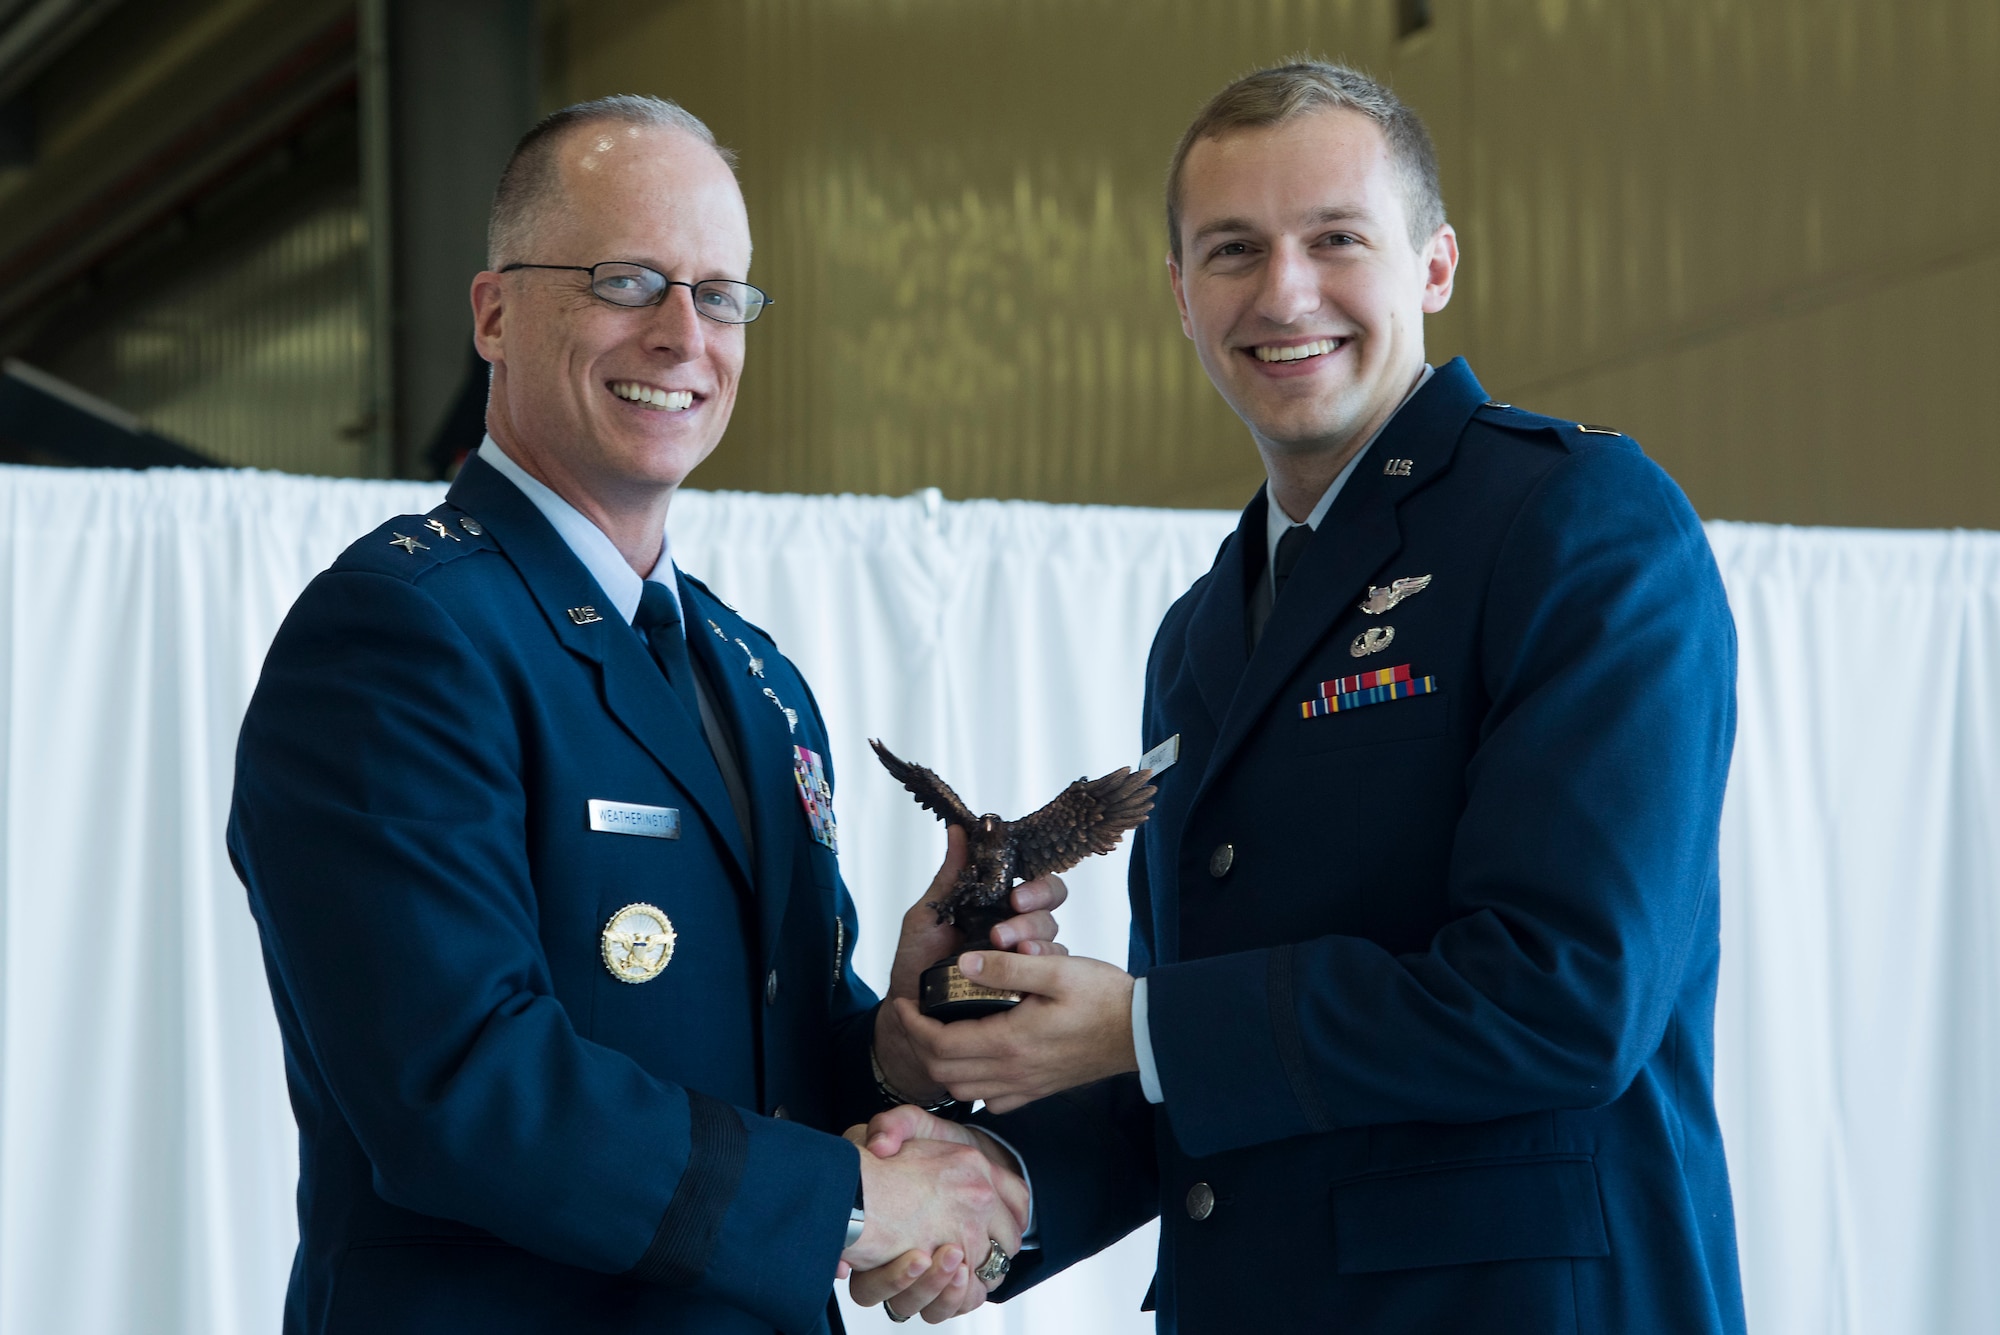 U.S. Air Force 2nd Lt. Nicholas Brandt, Pilot Training Next graduate receives the commander’s graduate award during the first ever Pilot Training Next graduation August 3, 2018 at the Texas Army National Guard Hangar in Austin, Texas. PTN is a program to explore and potentially prototype a training environment that integrates various technologies to produce pilots in an accelerated, cost efficient, learning-focused manner. (U.S. Air Force photo by Senior Airman Gwendalyn Smith)